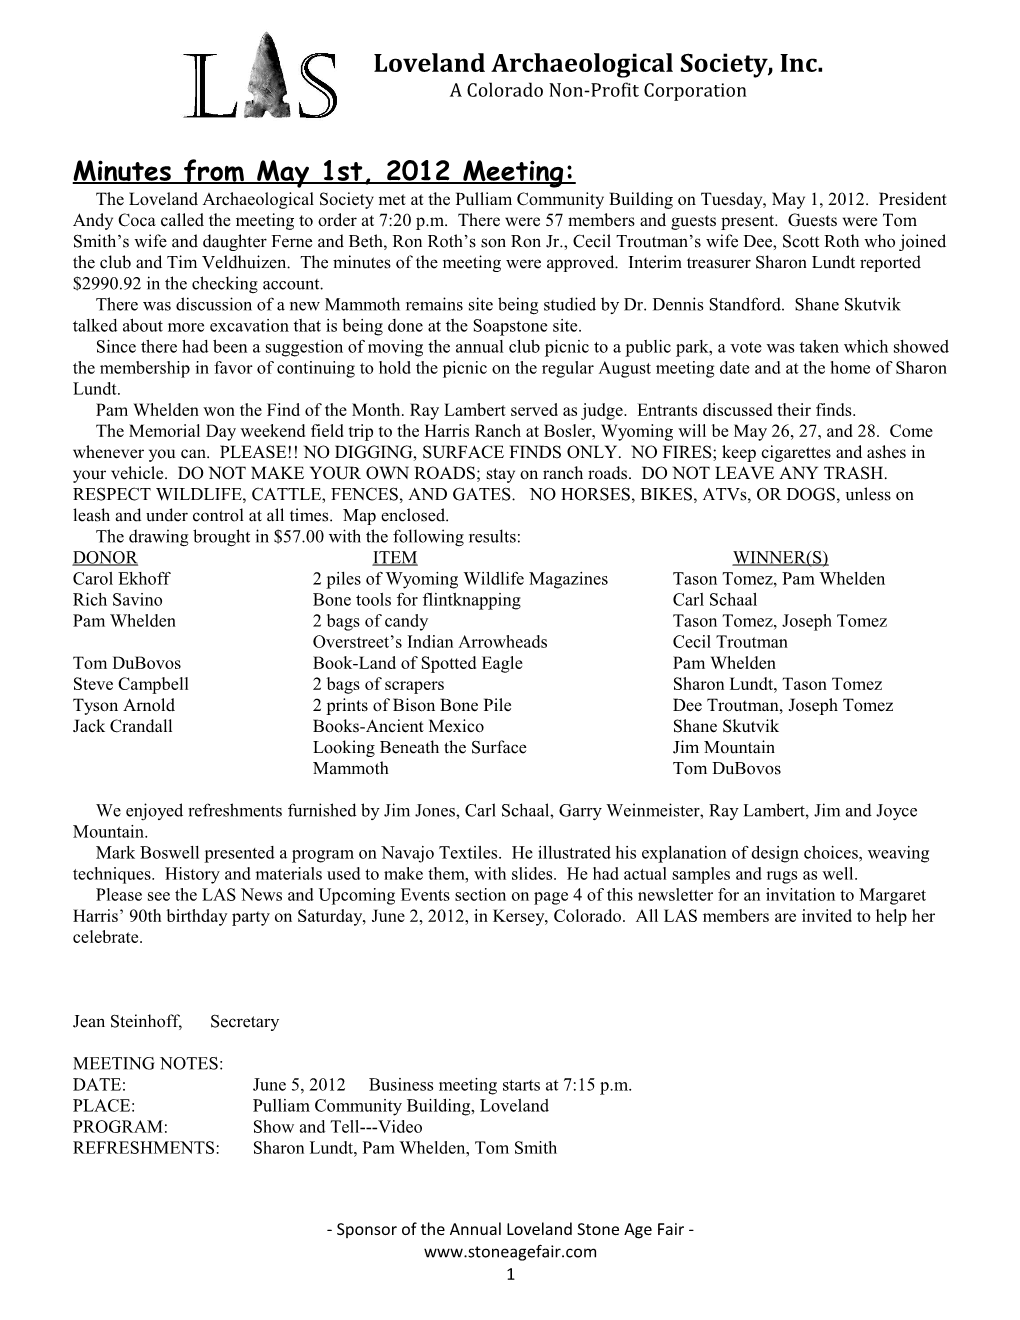 Minutes from December 6Th, 2011 Meeting